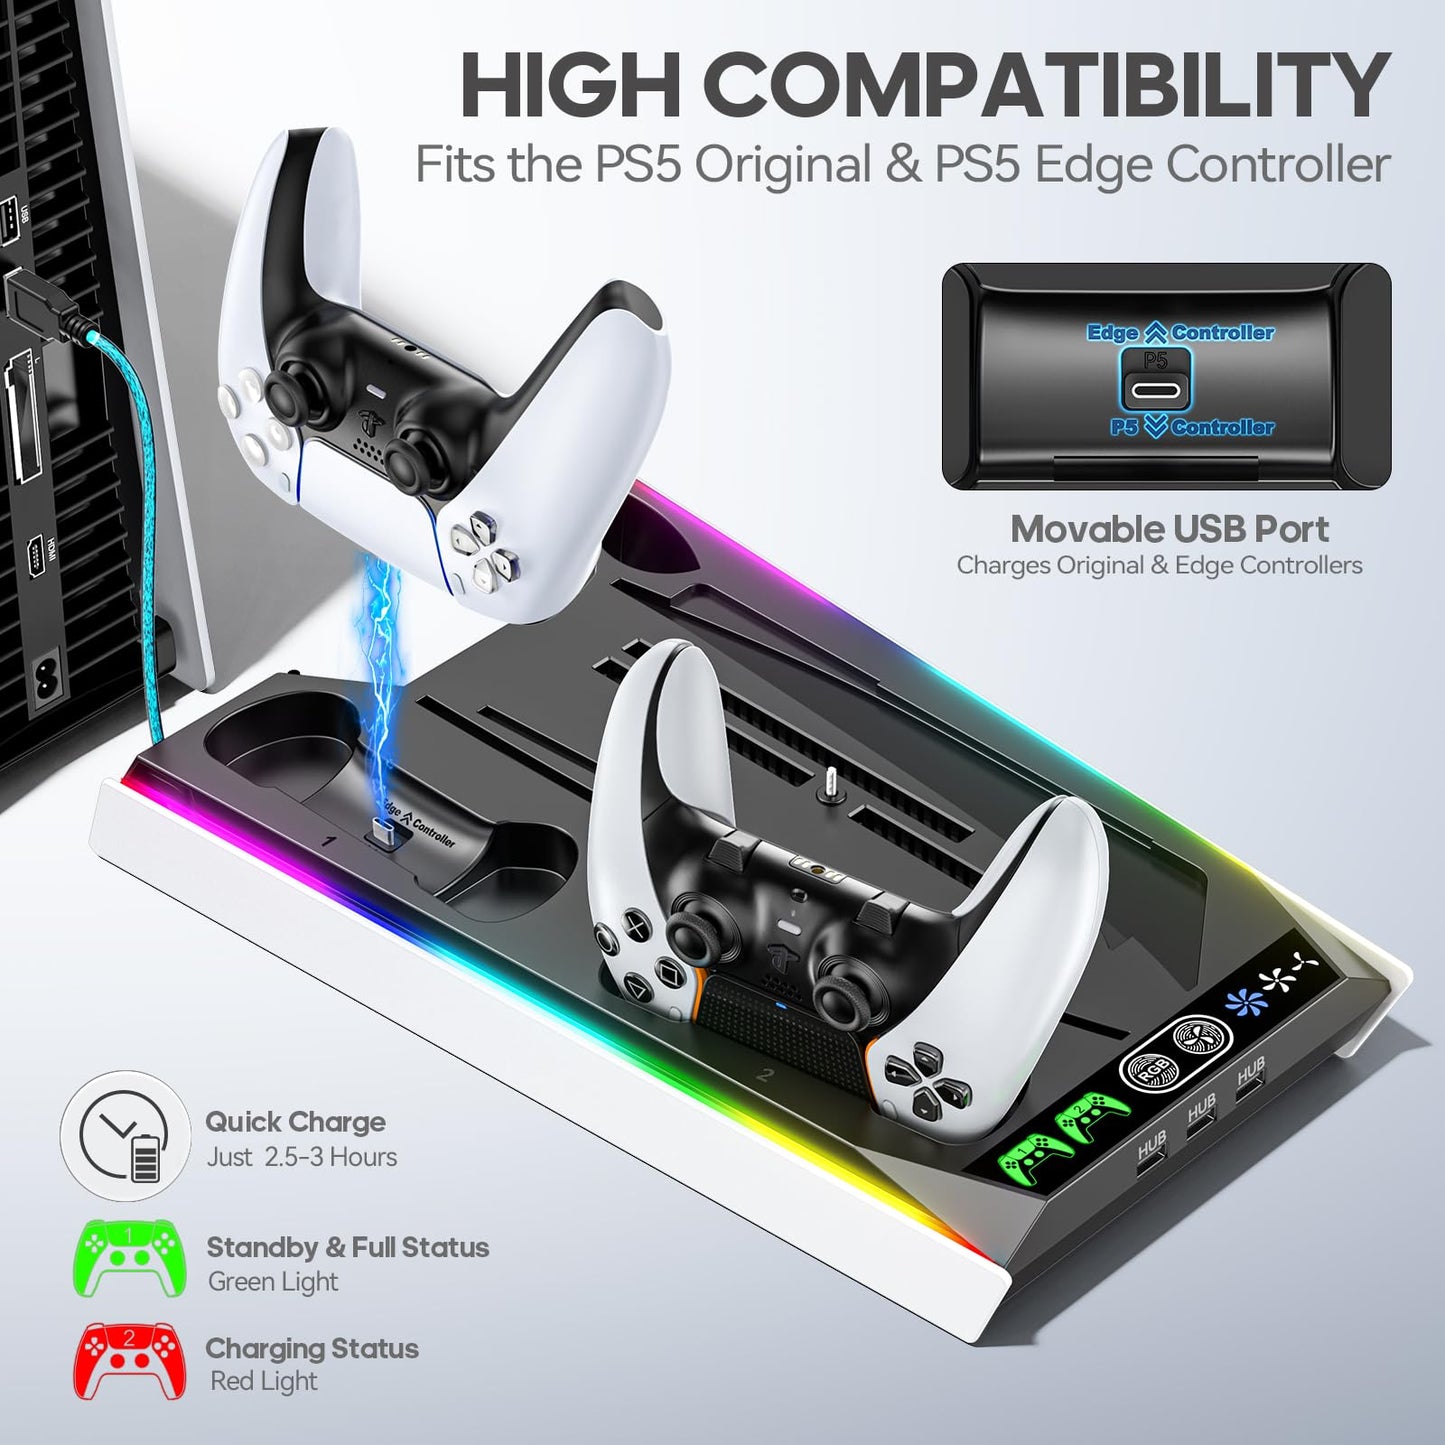 PS5 Stand for PS5 Slim Disc/PS5 Disc & Digital, 3-Level Cooling Station and RGB LED with Controller Charger for PS5 & Edge Controller, PS5 Accessories with 3 Charging Ports (Not Fit PS5 Slim Digital) - amzGamess